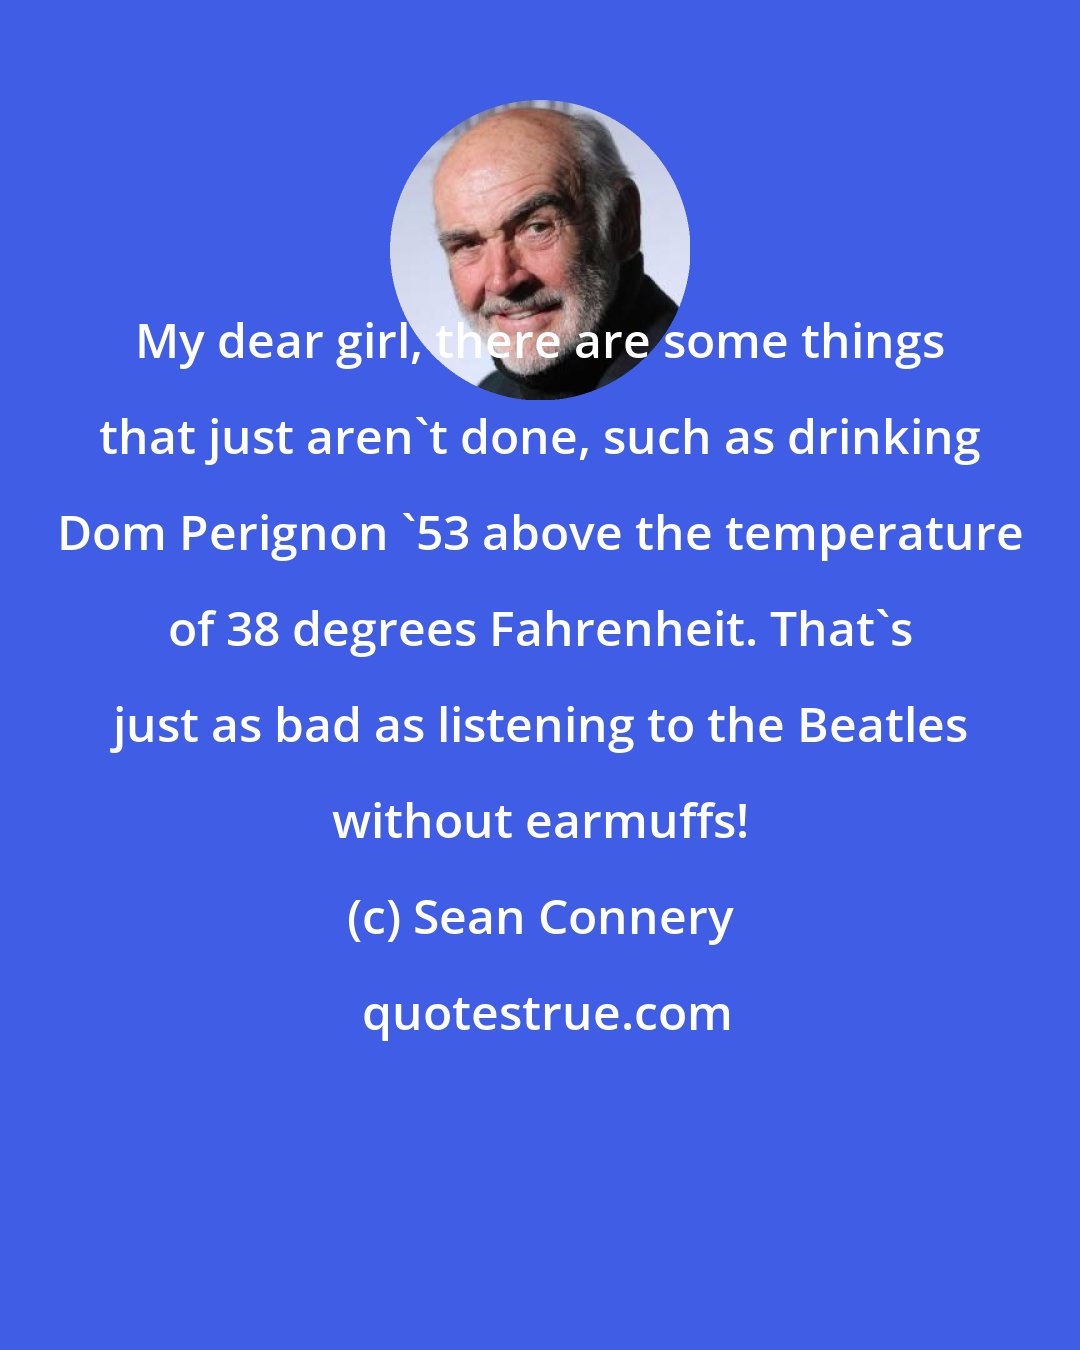 Sean Connery: My dear girl, there are some things that just aren't done, such as drinking Dom Perignon '53 above the temperature of 38 degrees Fahrenheit. That's just as bad as listening to the Beatles without earmuffs!